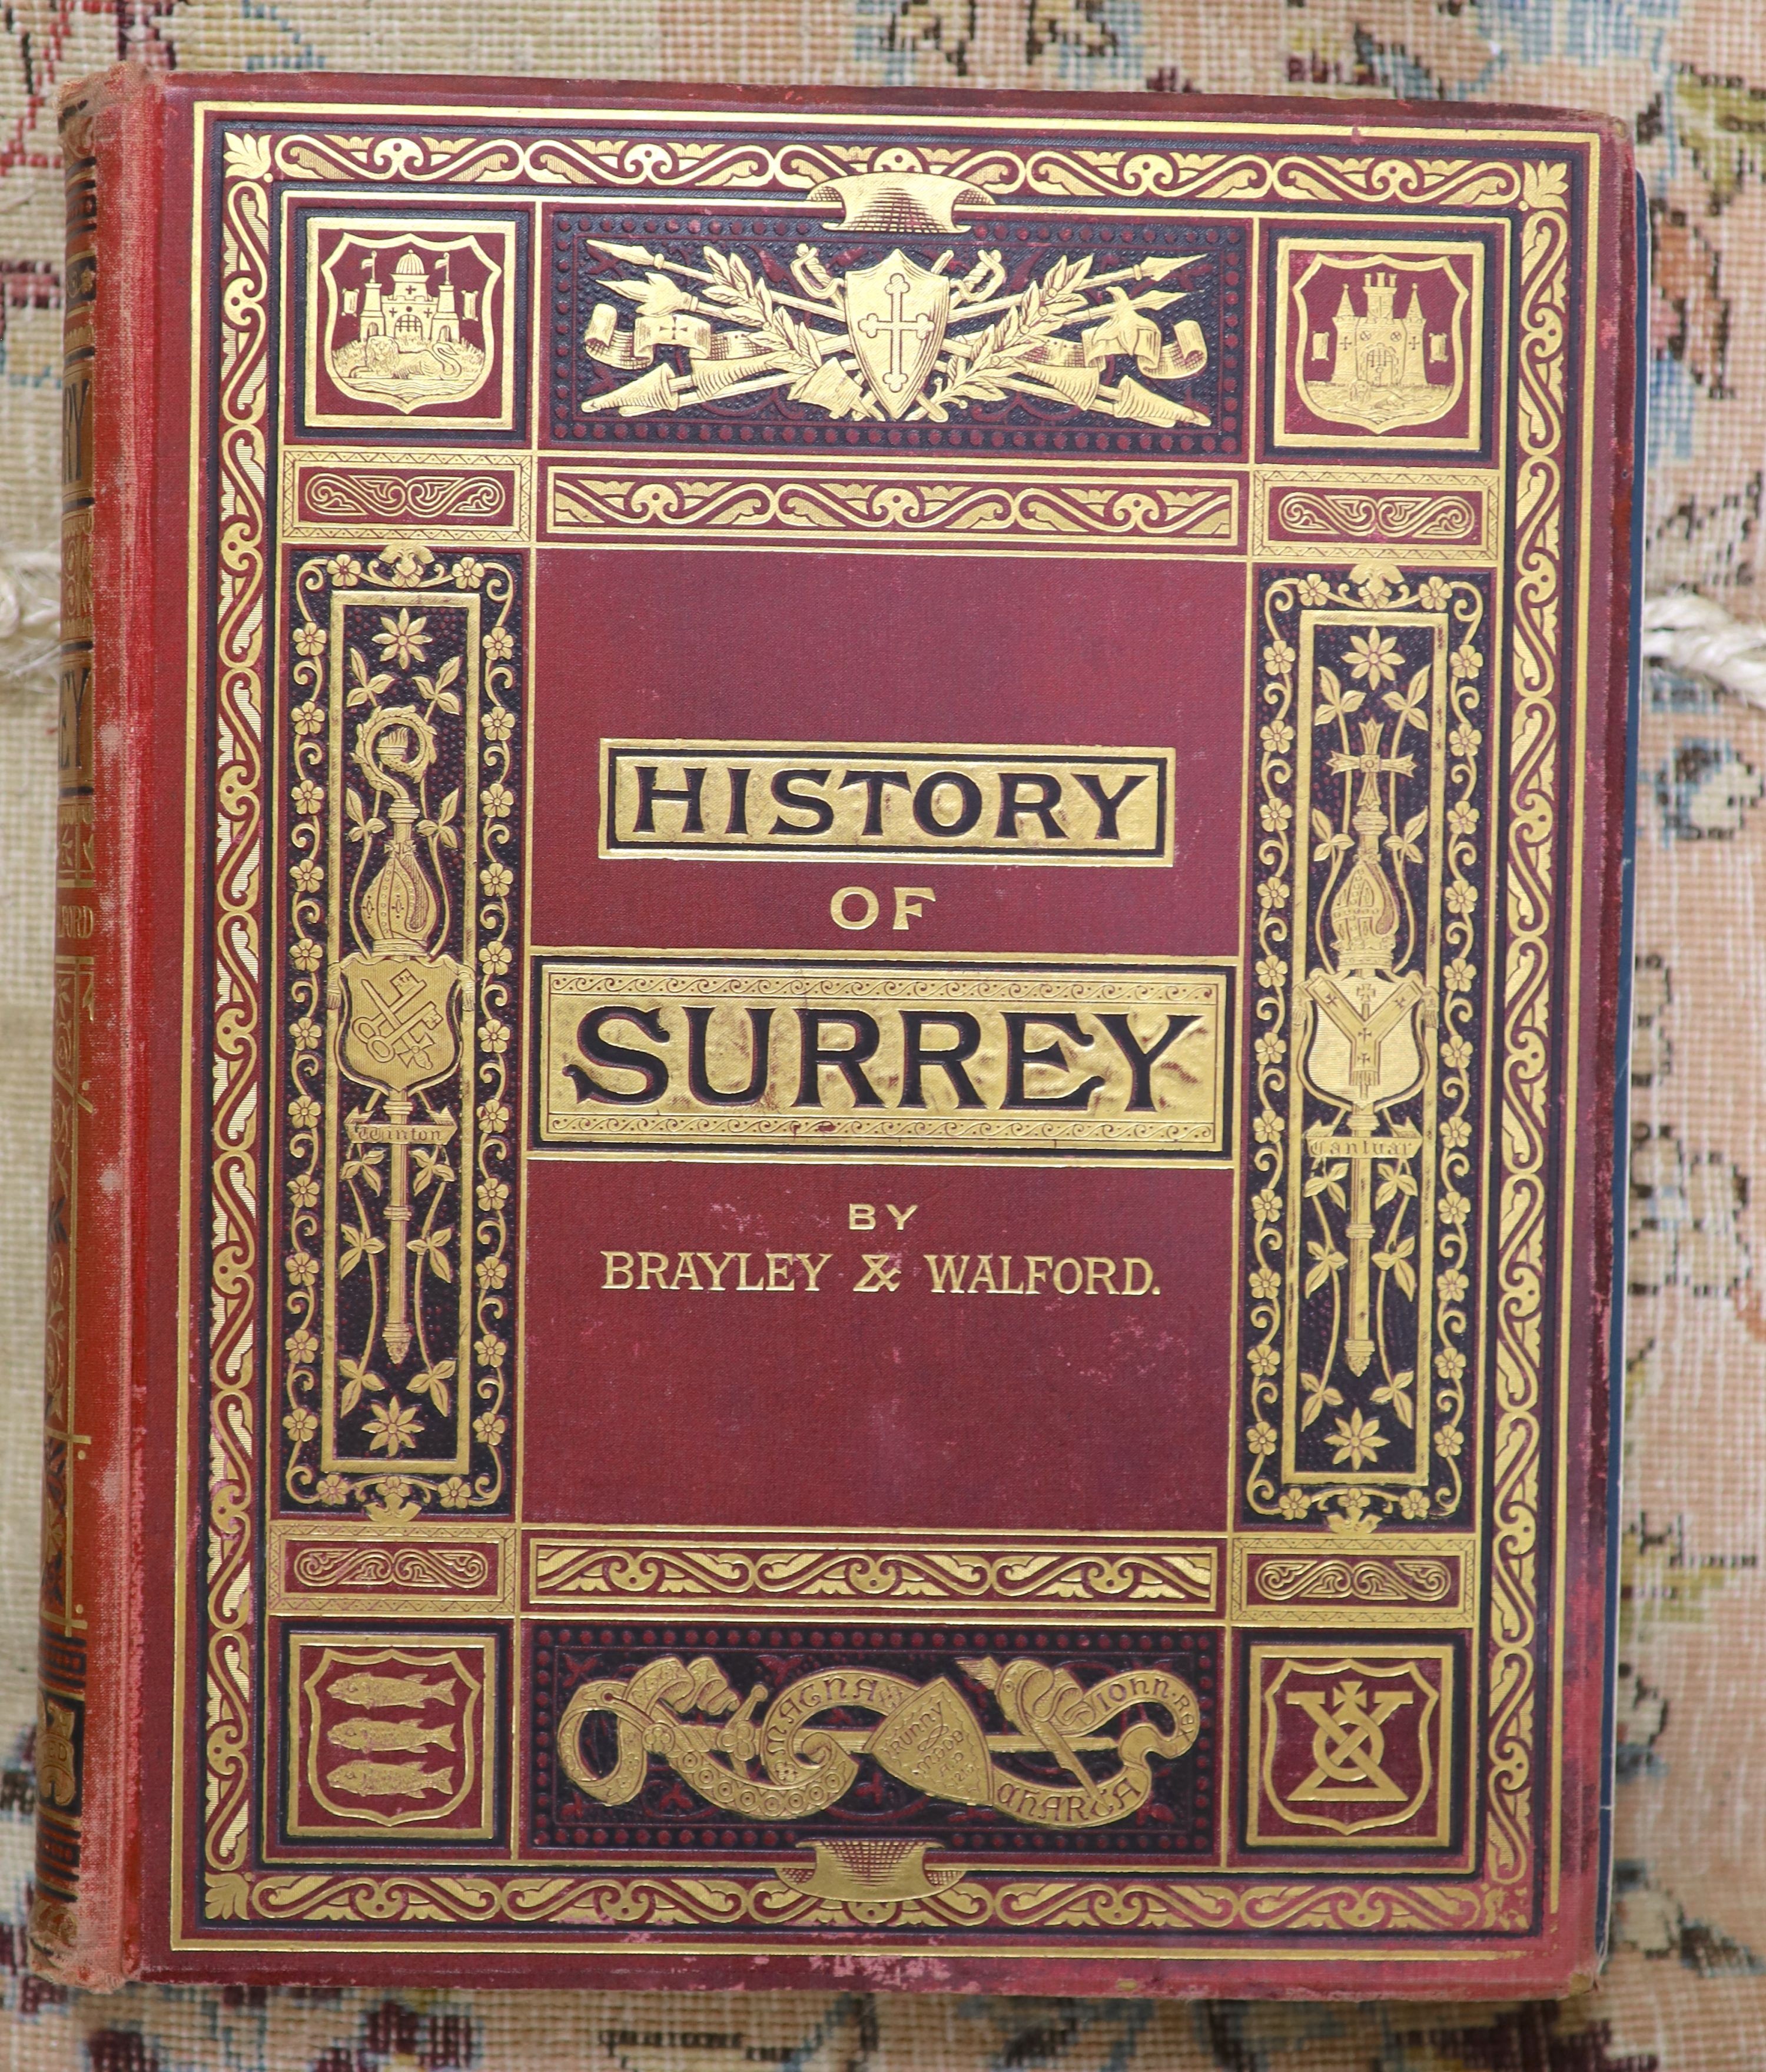 Brayley, Edward Wedlake - A Topographical History of Surrey, edited and revised by Edward Walford. 4 vols, complete with a steel engraved title page vignette to each and 75 steel engraved plates, of which 3 are coloured